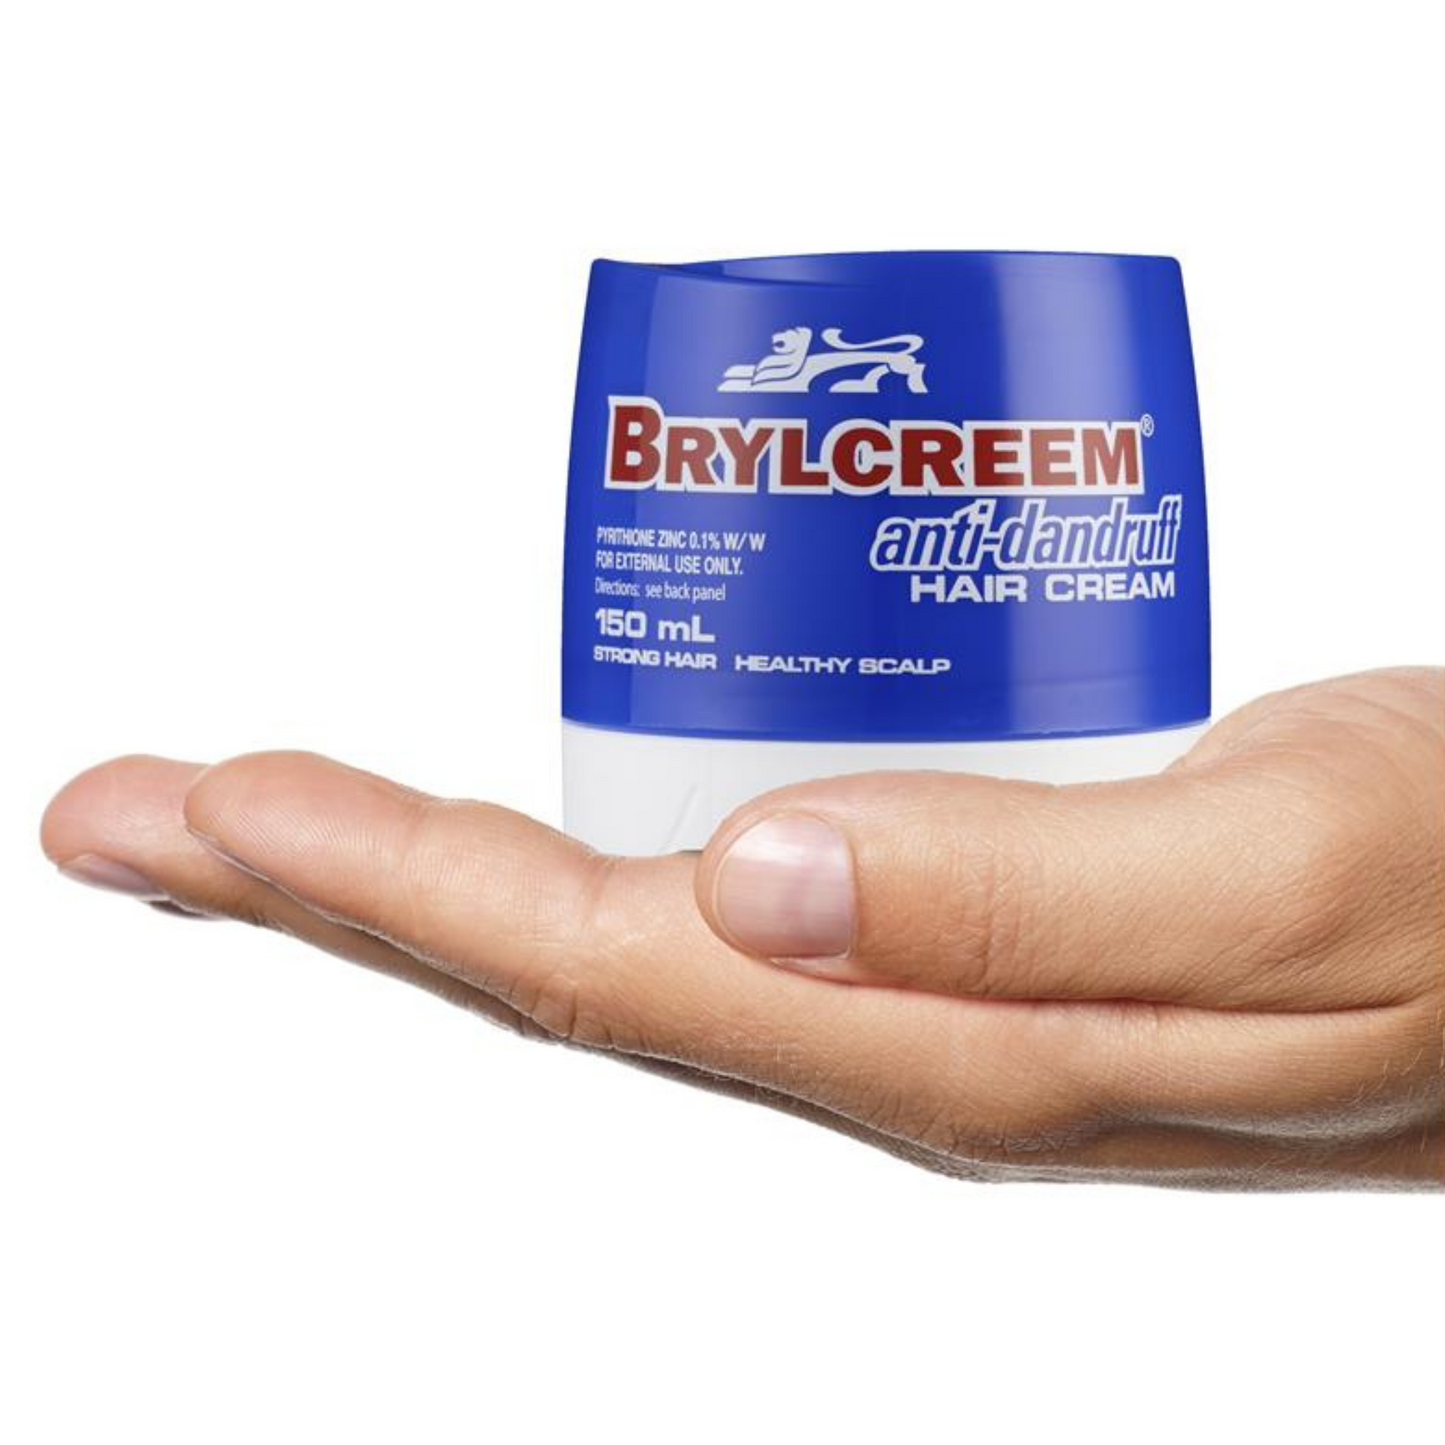 Brylcreem Hair Cream Anti-Dandruff hair styler keeps hair perfectly in place. It shines, styles & conditions hair, while reducing appearance of dandruff. Suitable for daily use. Best imported foreign British Australian Aussie genuine real safe premium quality care real men styling gel wax price in Dhaka Bangladesh.